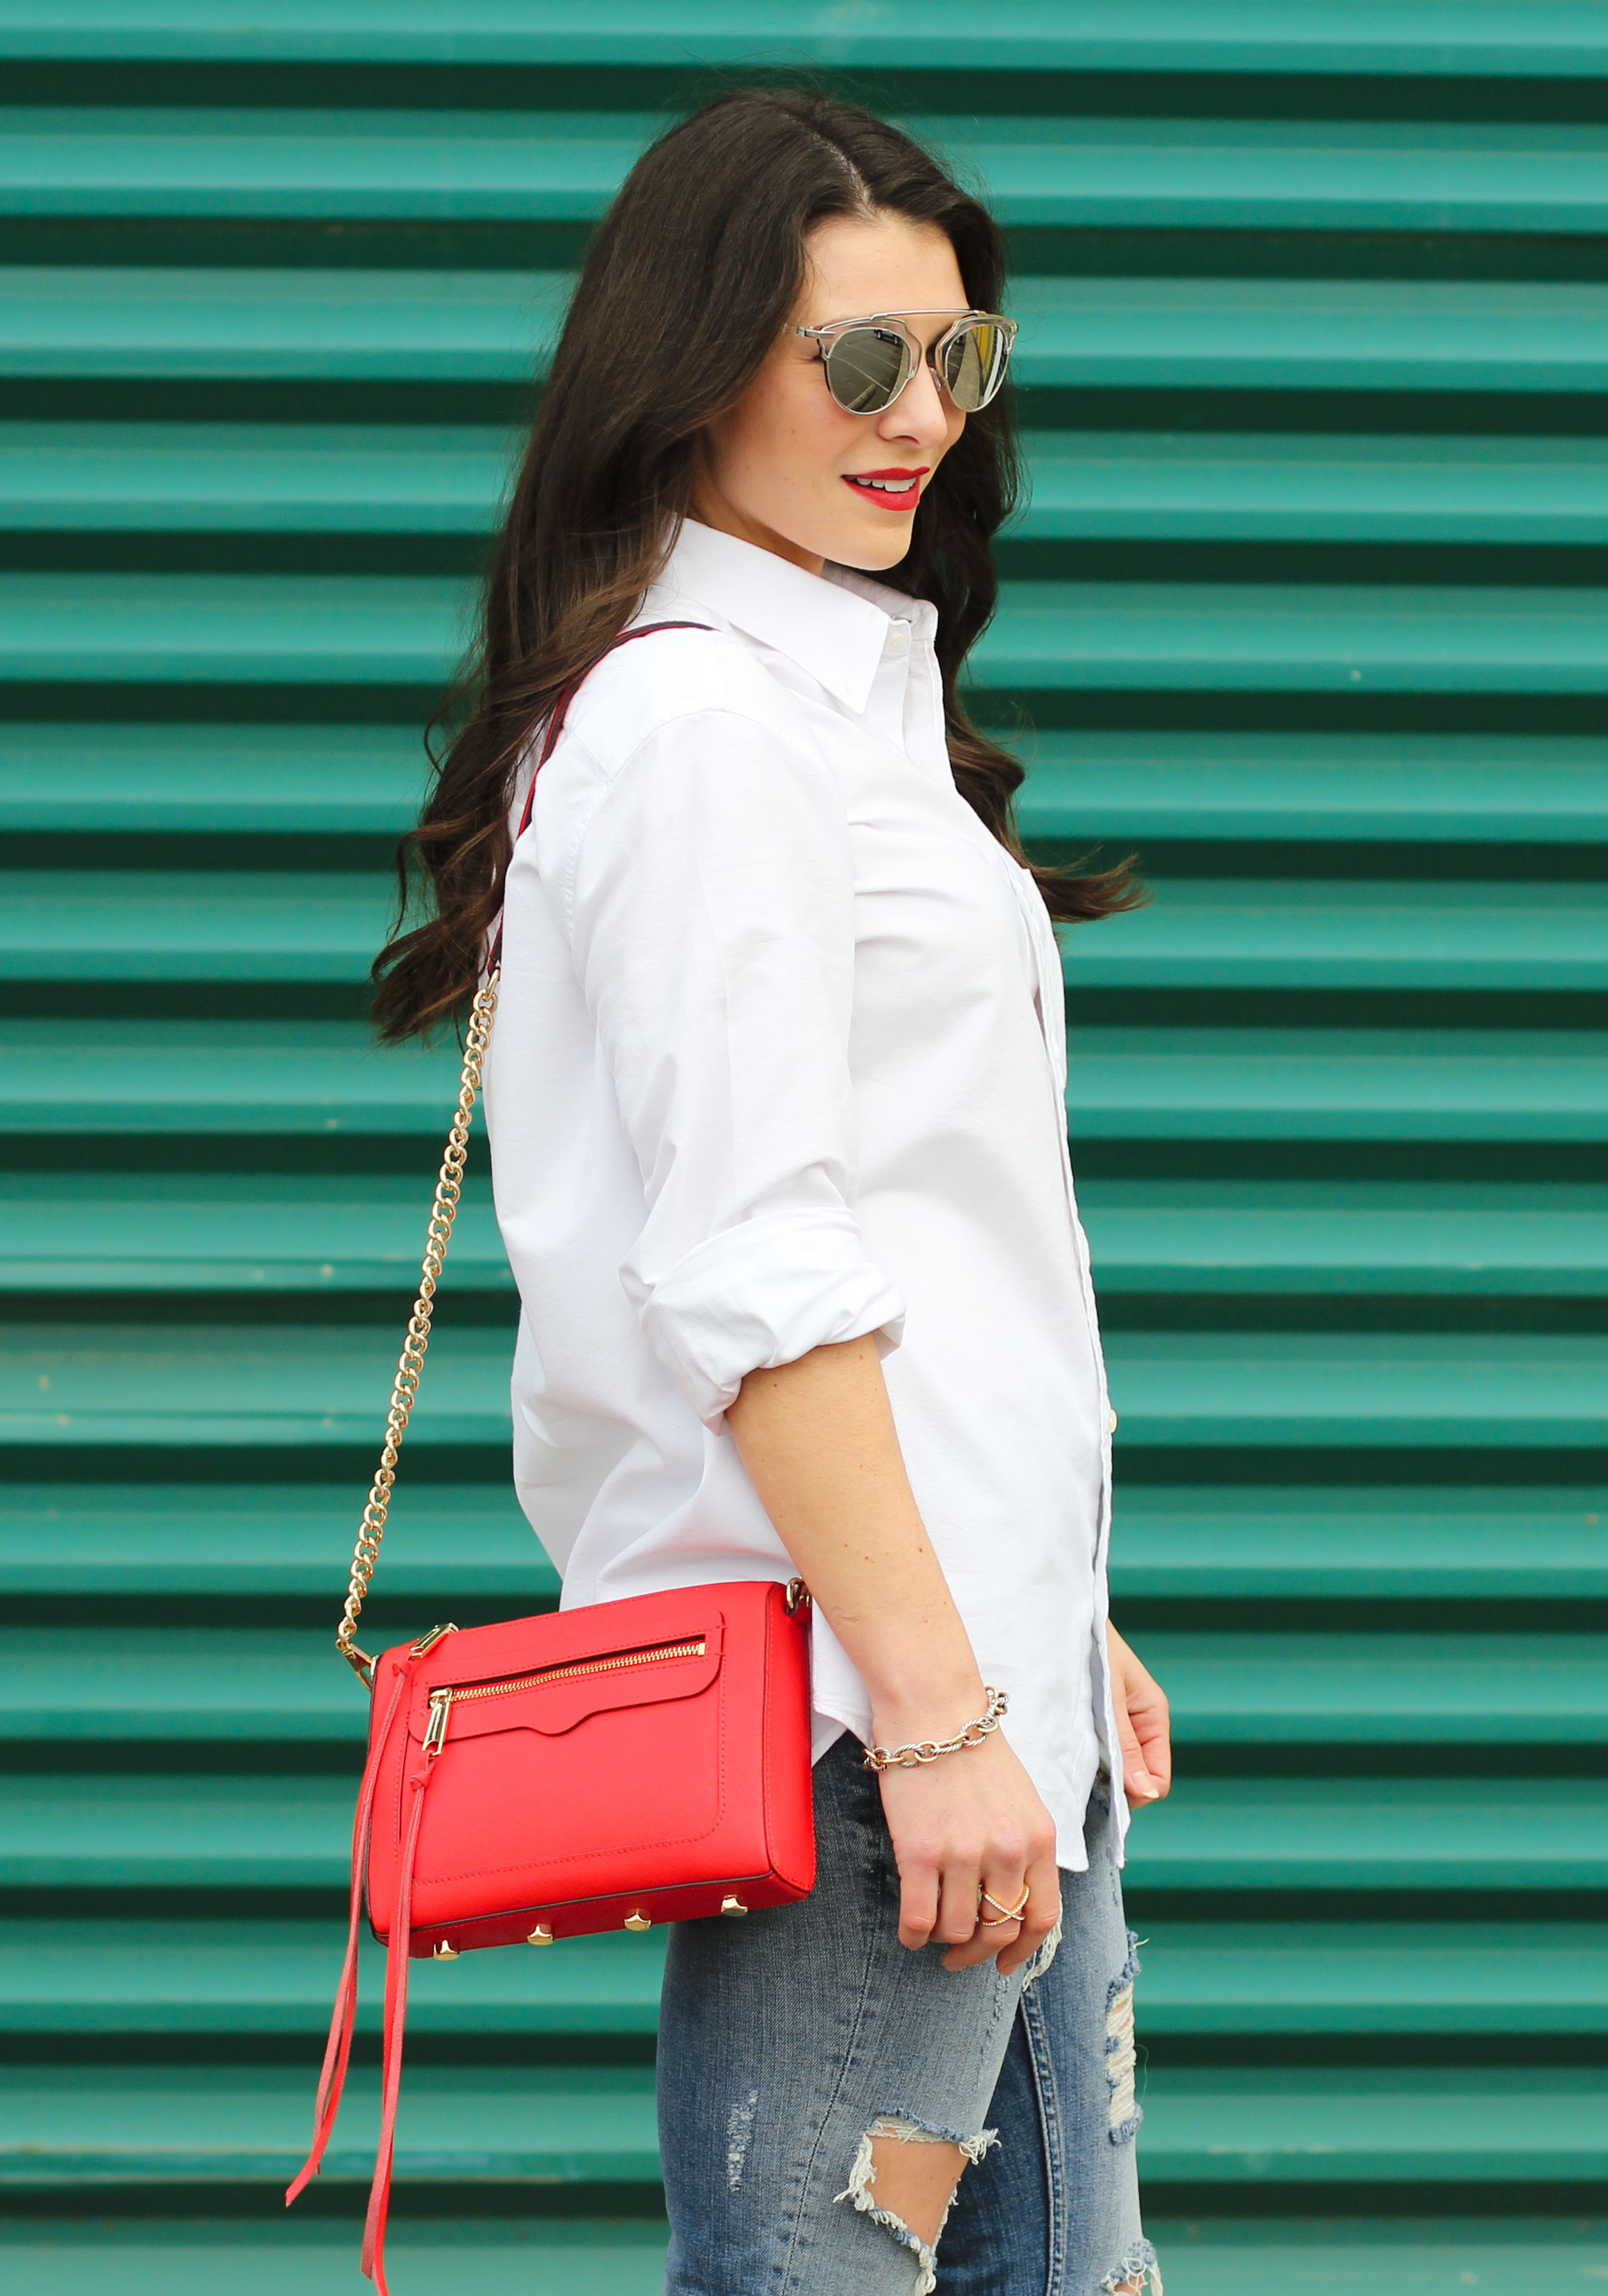 Boyfriend Shirt Outfit, Destroyed Jeans, Red Pumps, Rebecca Minkoff Red Avery Crossbody Bag, Dior Replica Sunglasses, Weekend Style